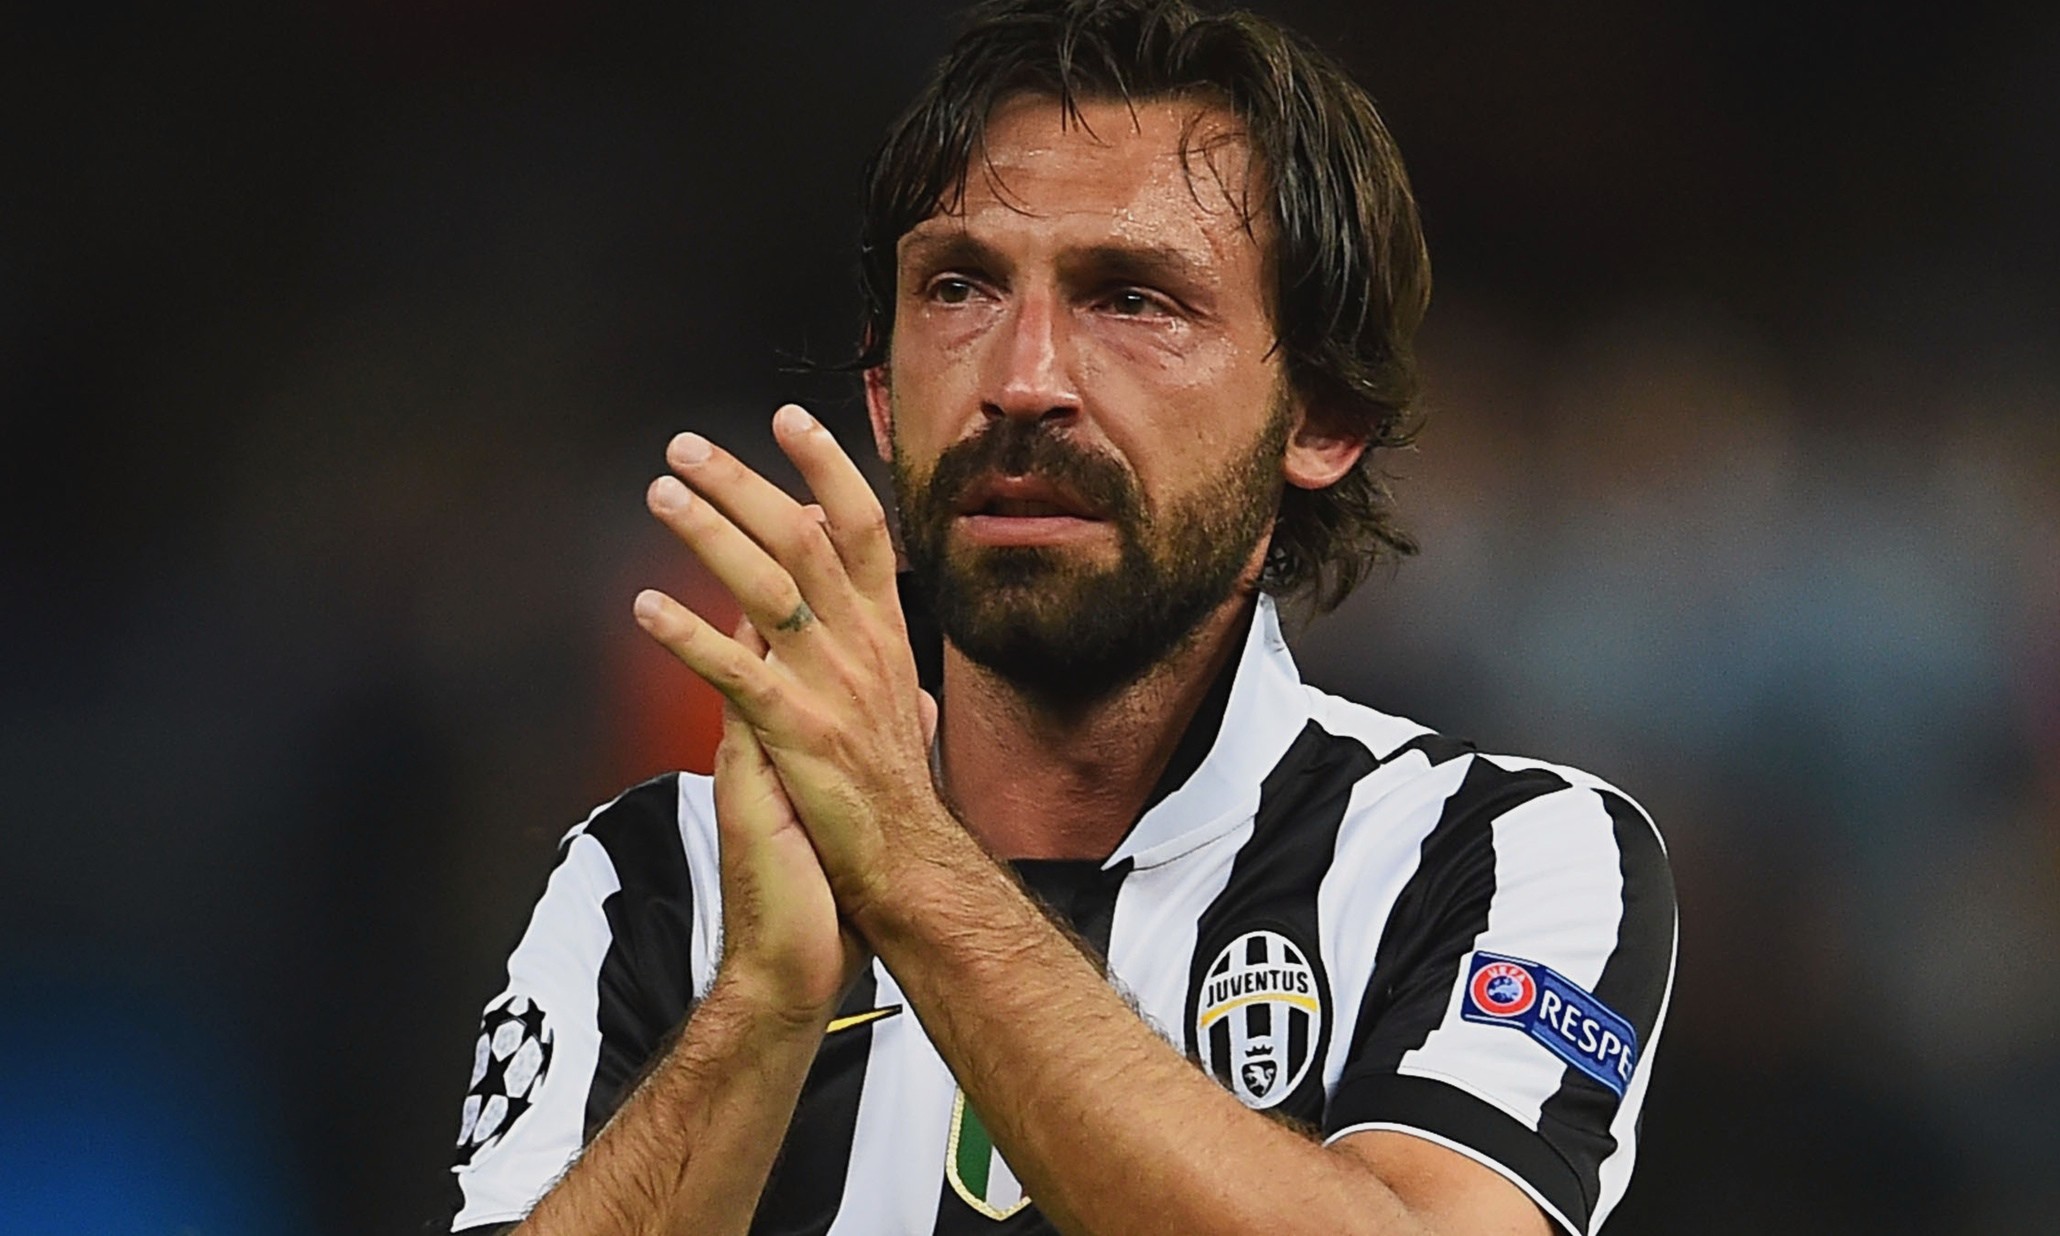 Andrea Pirlo Wallpapers Hd Download - Andrea Pirlo Champions League Final , HD Wallpaper & Backgrounds